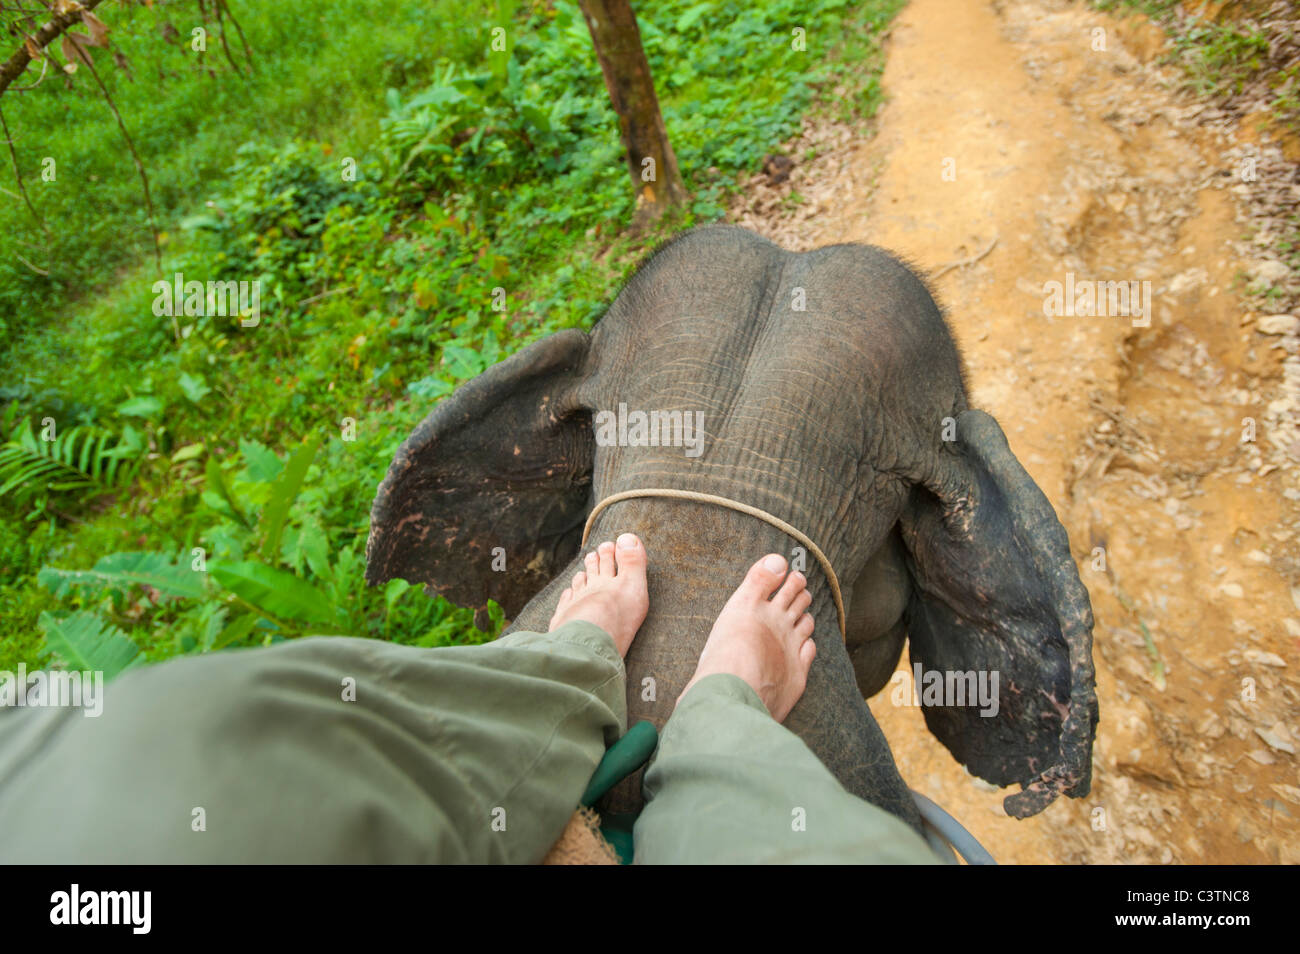 elephant riding on an elephants back own will force ride move steer guide rule govern guidance steering elefant mahout leg legs Stock Photo